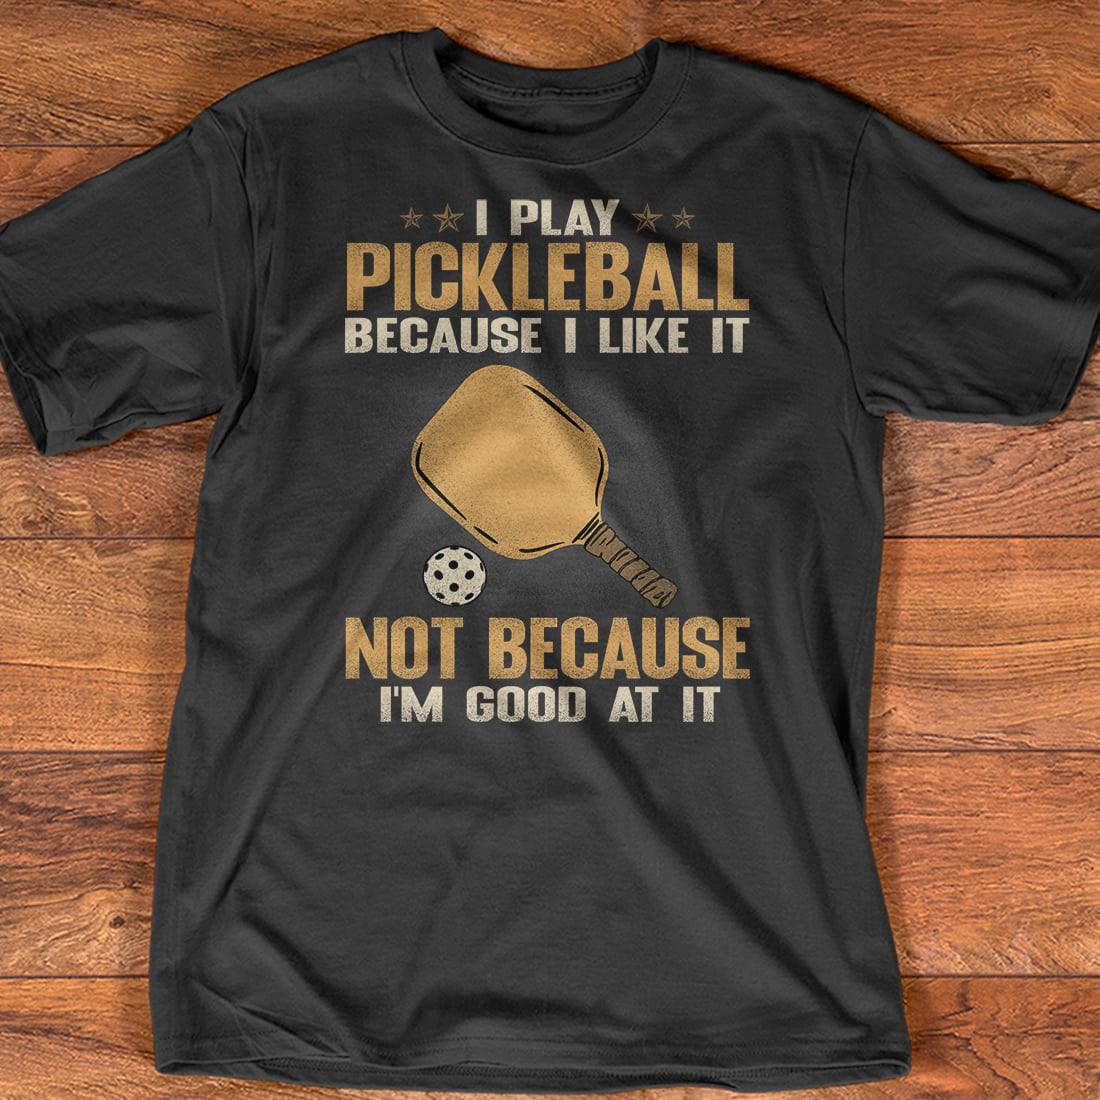 I play pickleball because I like it not because I'm good at it - Love playing pickleball